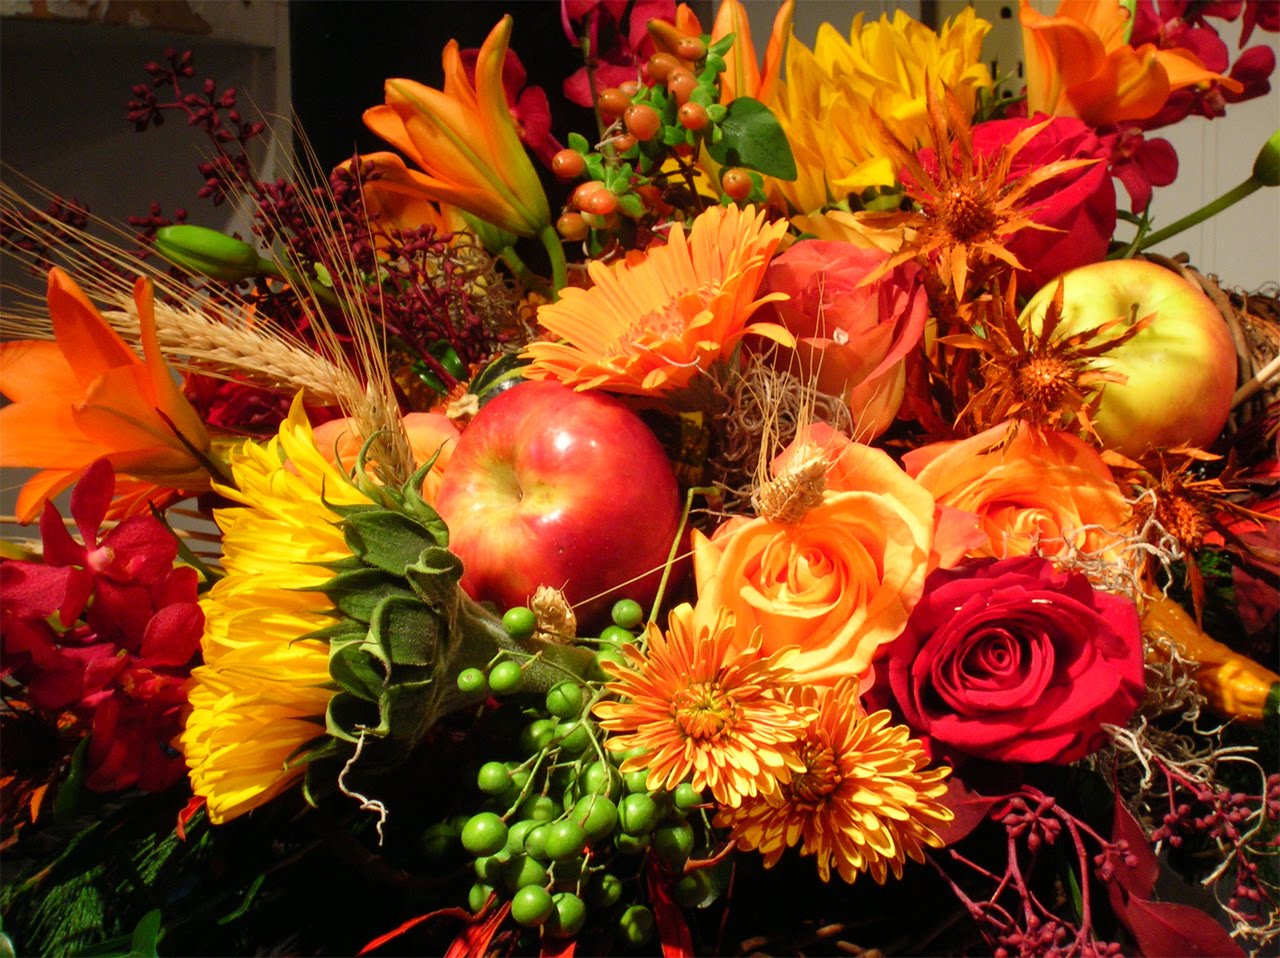 Desktop Puter By Setting Any Of These Thanksgiving Flower Wallpaper